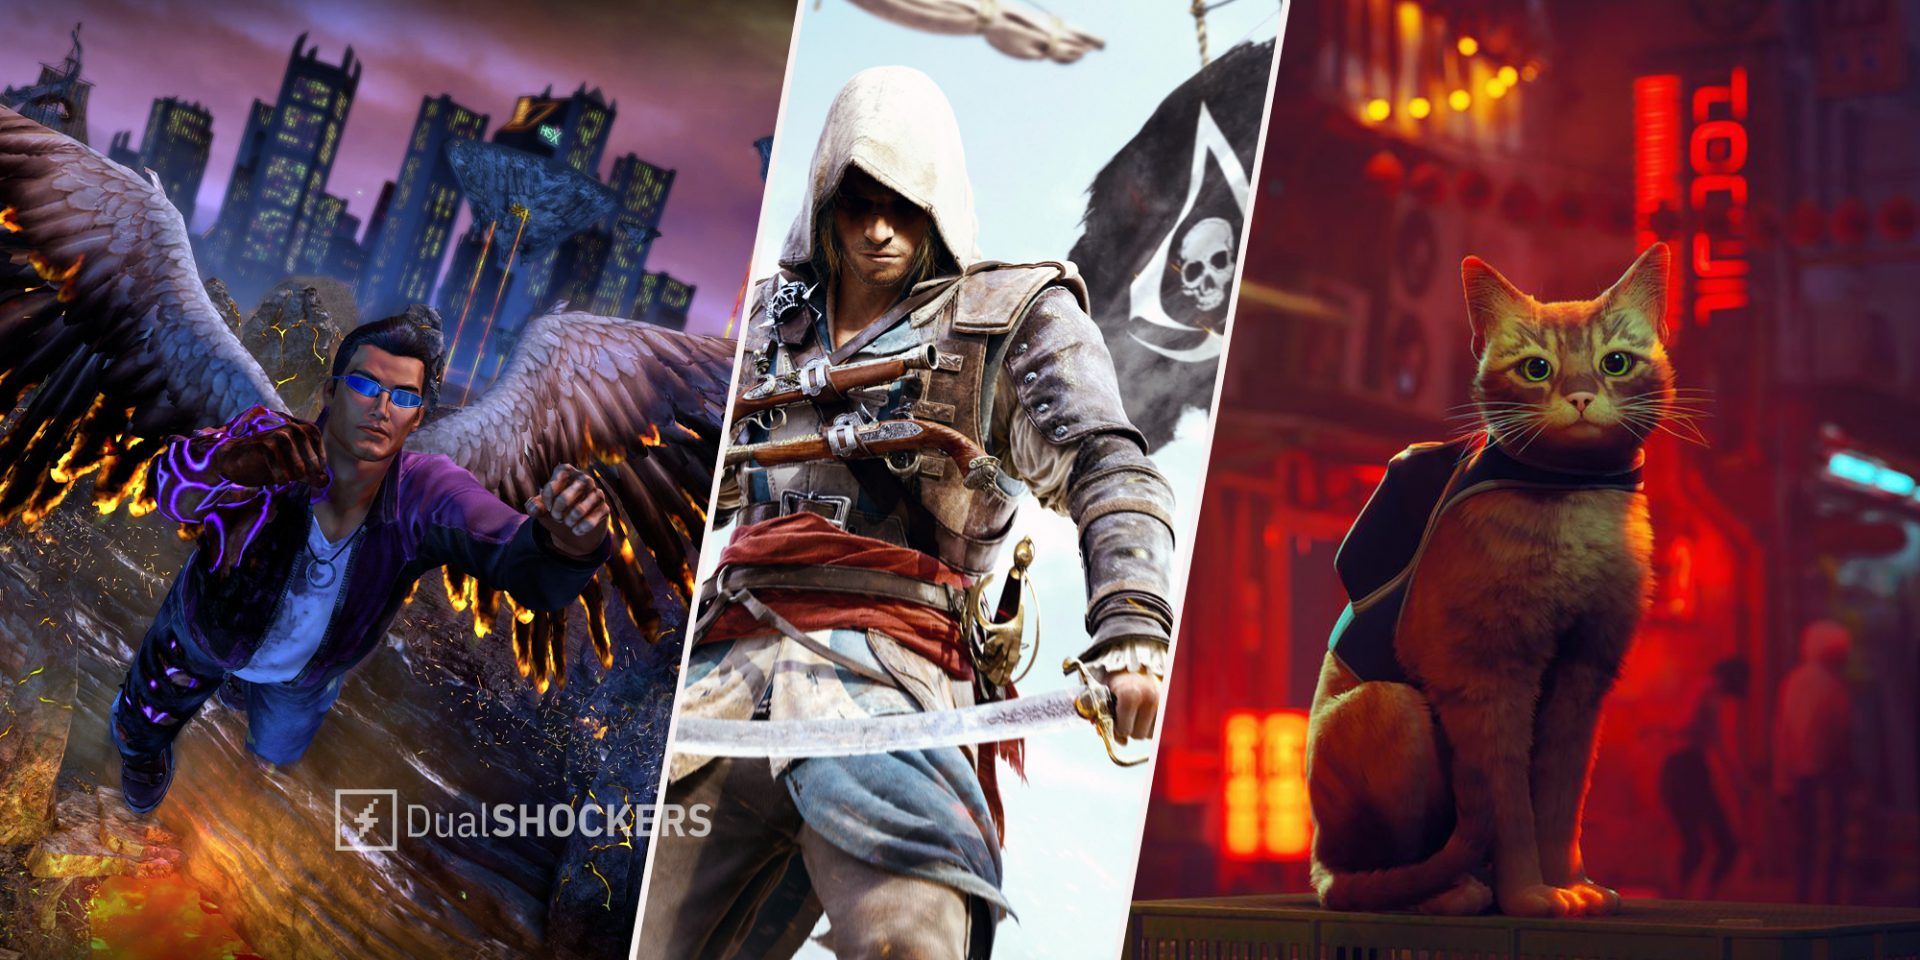 Saints Row IV Re-Elected on left, Assassin's Creed 4 Black Flag in middle, Stray on right